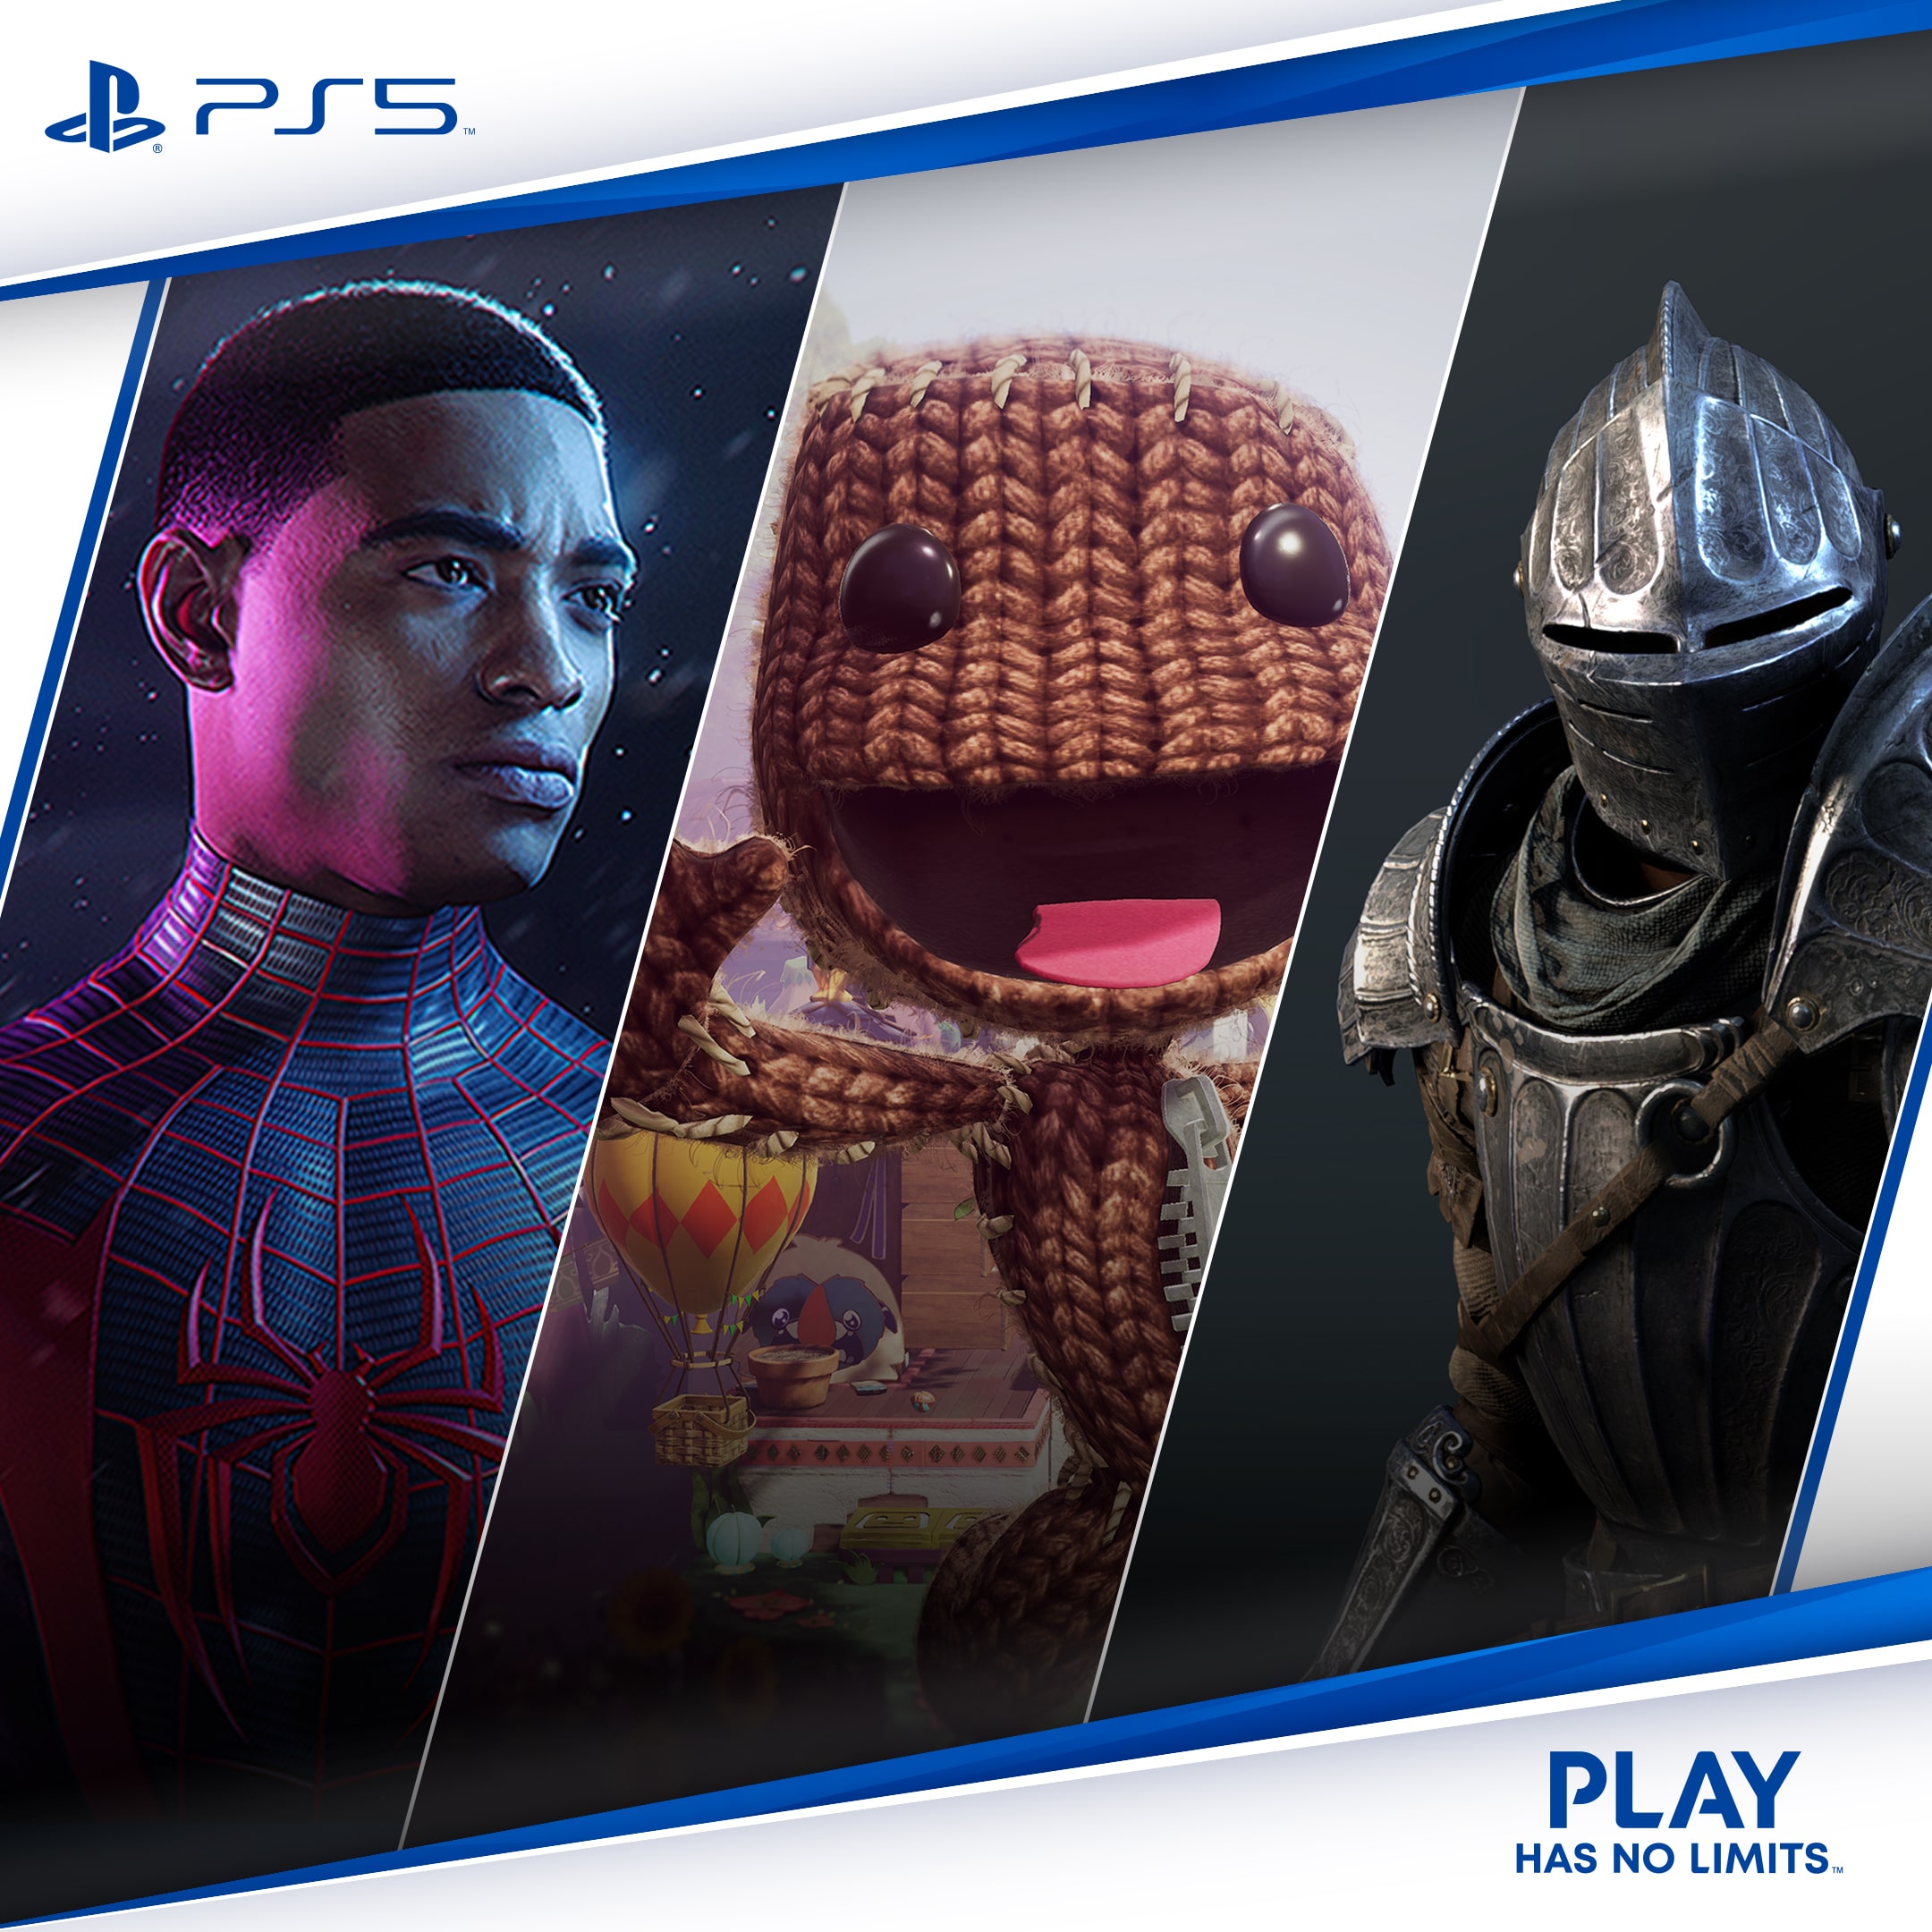 official playstation store uk